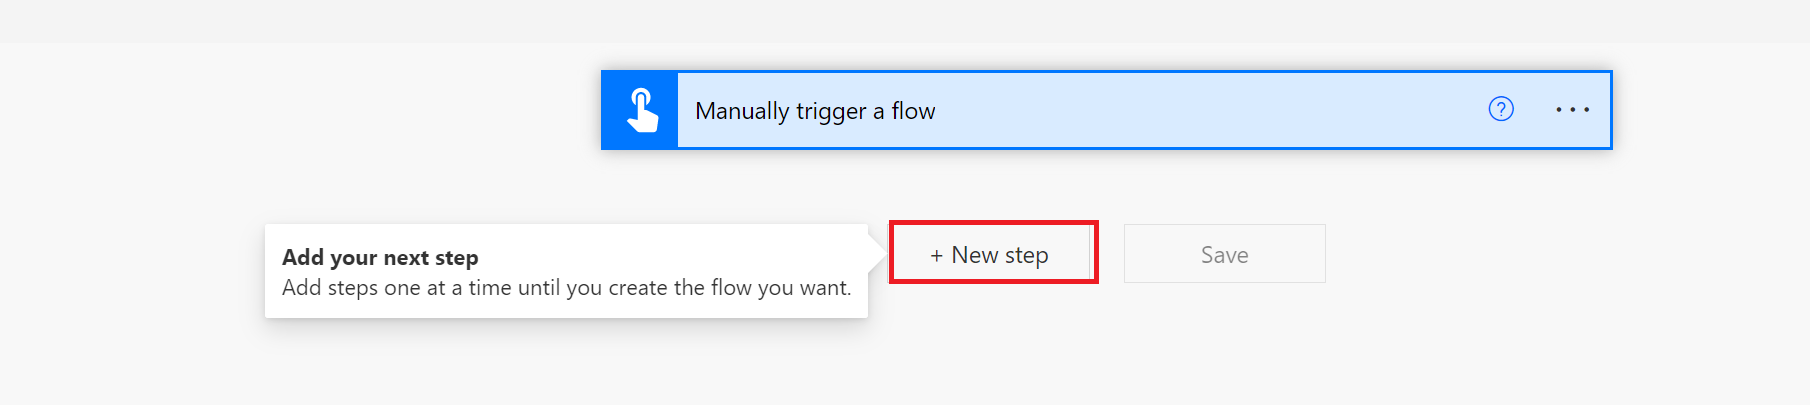 Screenshot of add new flow step page.